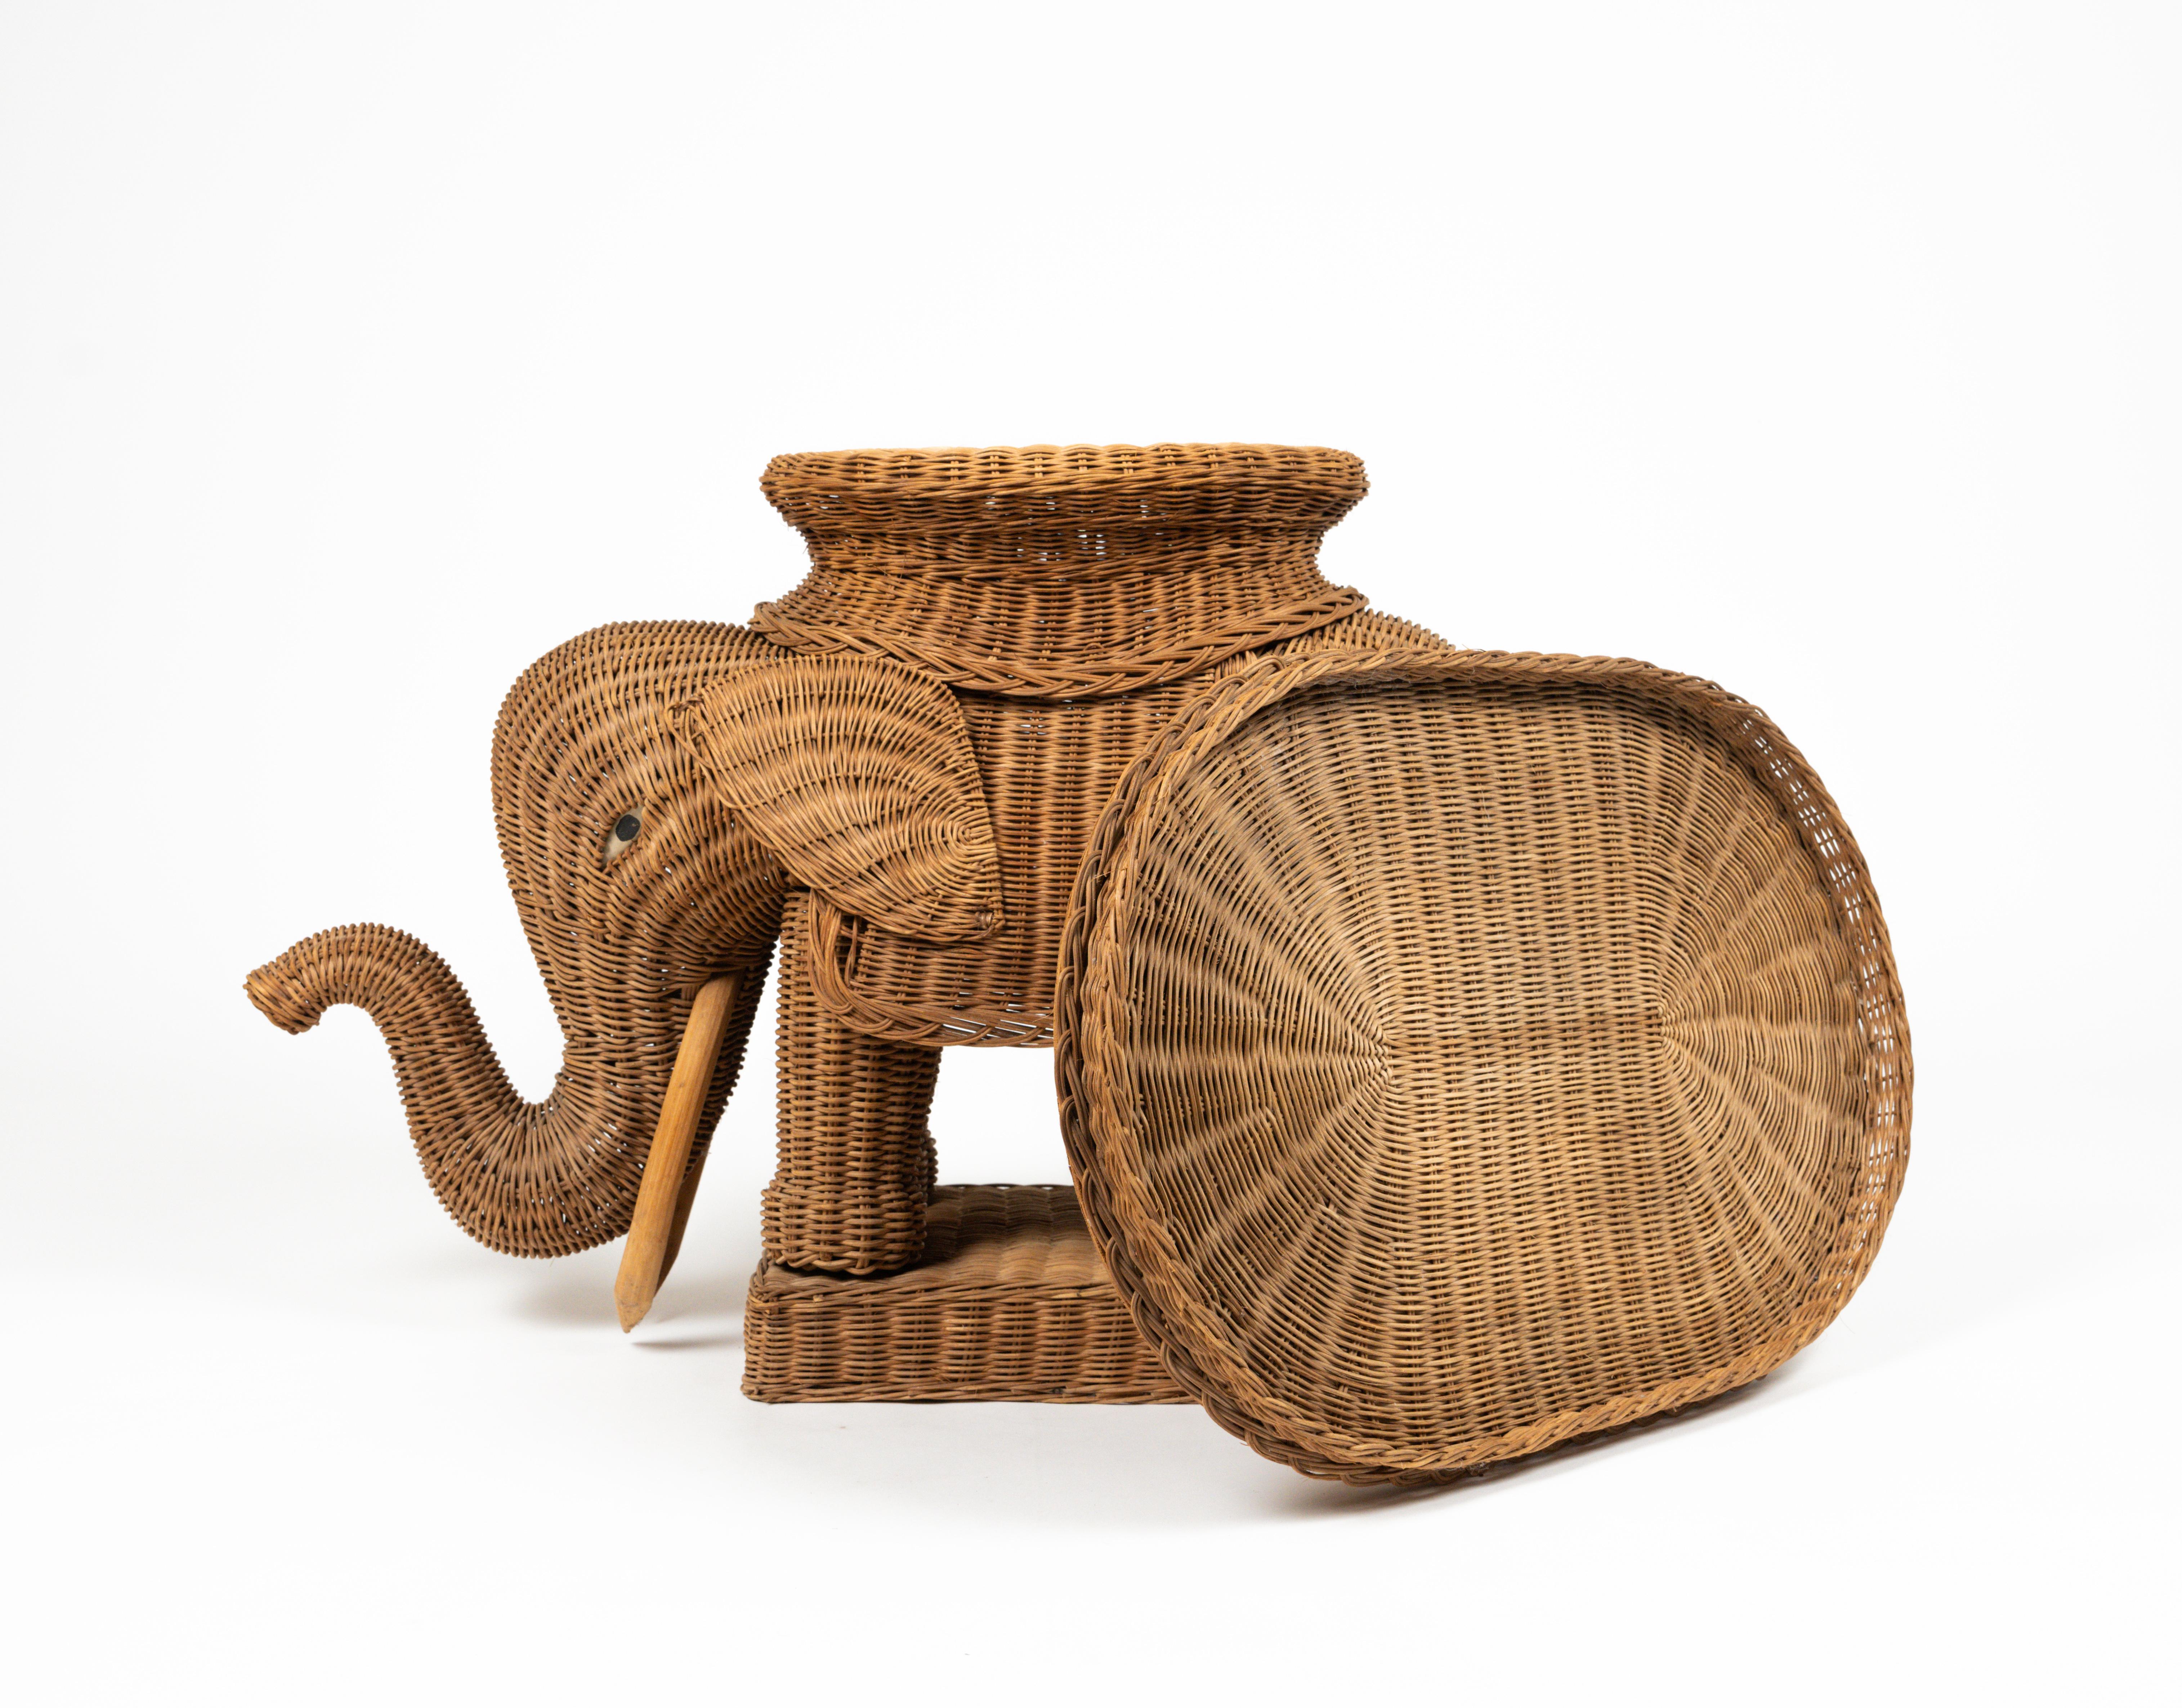 Rattan & Wicker Elephant Side Coffee Table Vivai Del Sud Style, Italy, 1960s For Sale 3